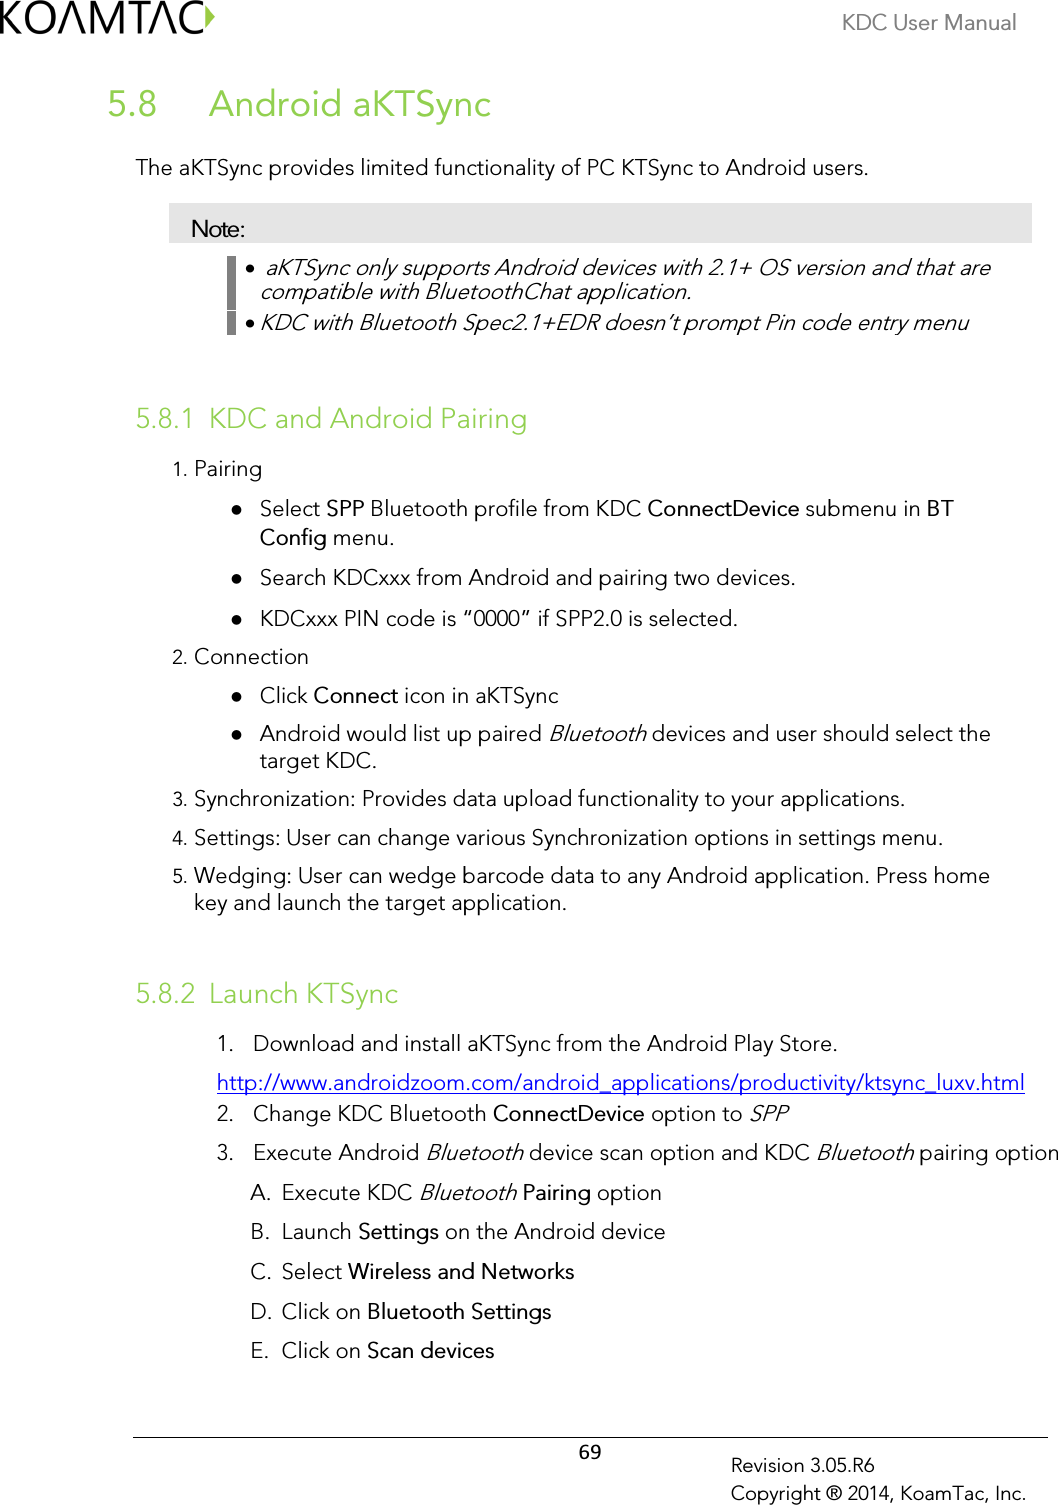 KDC User Manual  69 Revision 3.05.R6 Copyright ® 2014, KoamTac, Inc.  Android aKTSync 5.8 The aKTSync provides limited functionality of PC KTSync to Android users.  Note: •  aKTSync only supports Android devices with 2.1+ OS version and that are compatible with BluetoothChat application. • KDC with Bluetooth Spec2.1+EDR doesn’t prompt Pin code entry menu   5.8.1 KDC and Android Pairing 1. Pairing  Select SPP Bluetooth profile from KDC ConnectDevice submenu in BT Config menu.  Search KDCxxx from Android and pairing two devices.  KDCxxx PIN code is “0000” if SPP2.0 is selected. 2. Connection  Click Connect icon in aKTSync  Android would list up paired Bluetooth devices and user should select the target KDC. 3. Synchronization: Provides data upload functionality to your applications. 4. Settings: User can change various Synchronization options in settings menu. 5. Wedging: User can wedge barcode data to any Android application. Press home key and launch the target application.   5.8.2 Launch KTSync 1. Download and install aKTSync from the Android Play Store. http://www.androidzoom.com/android_applications/productivity/ktsync_luxv.html 2. Change KDC Bluetooth ConnectDevice option to SPP 3. Execute Android Bluetooth device scan option and KDC Bluetooth pairing option A. Execute KDC Bluetooth Pairing option  B. Launch Settings on the Android device C. Select Wireless and Networks D. Click on Bluetooth Settings E. Click on Scan devices 